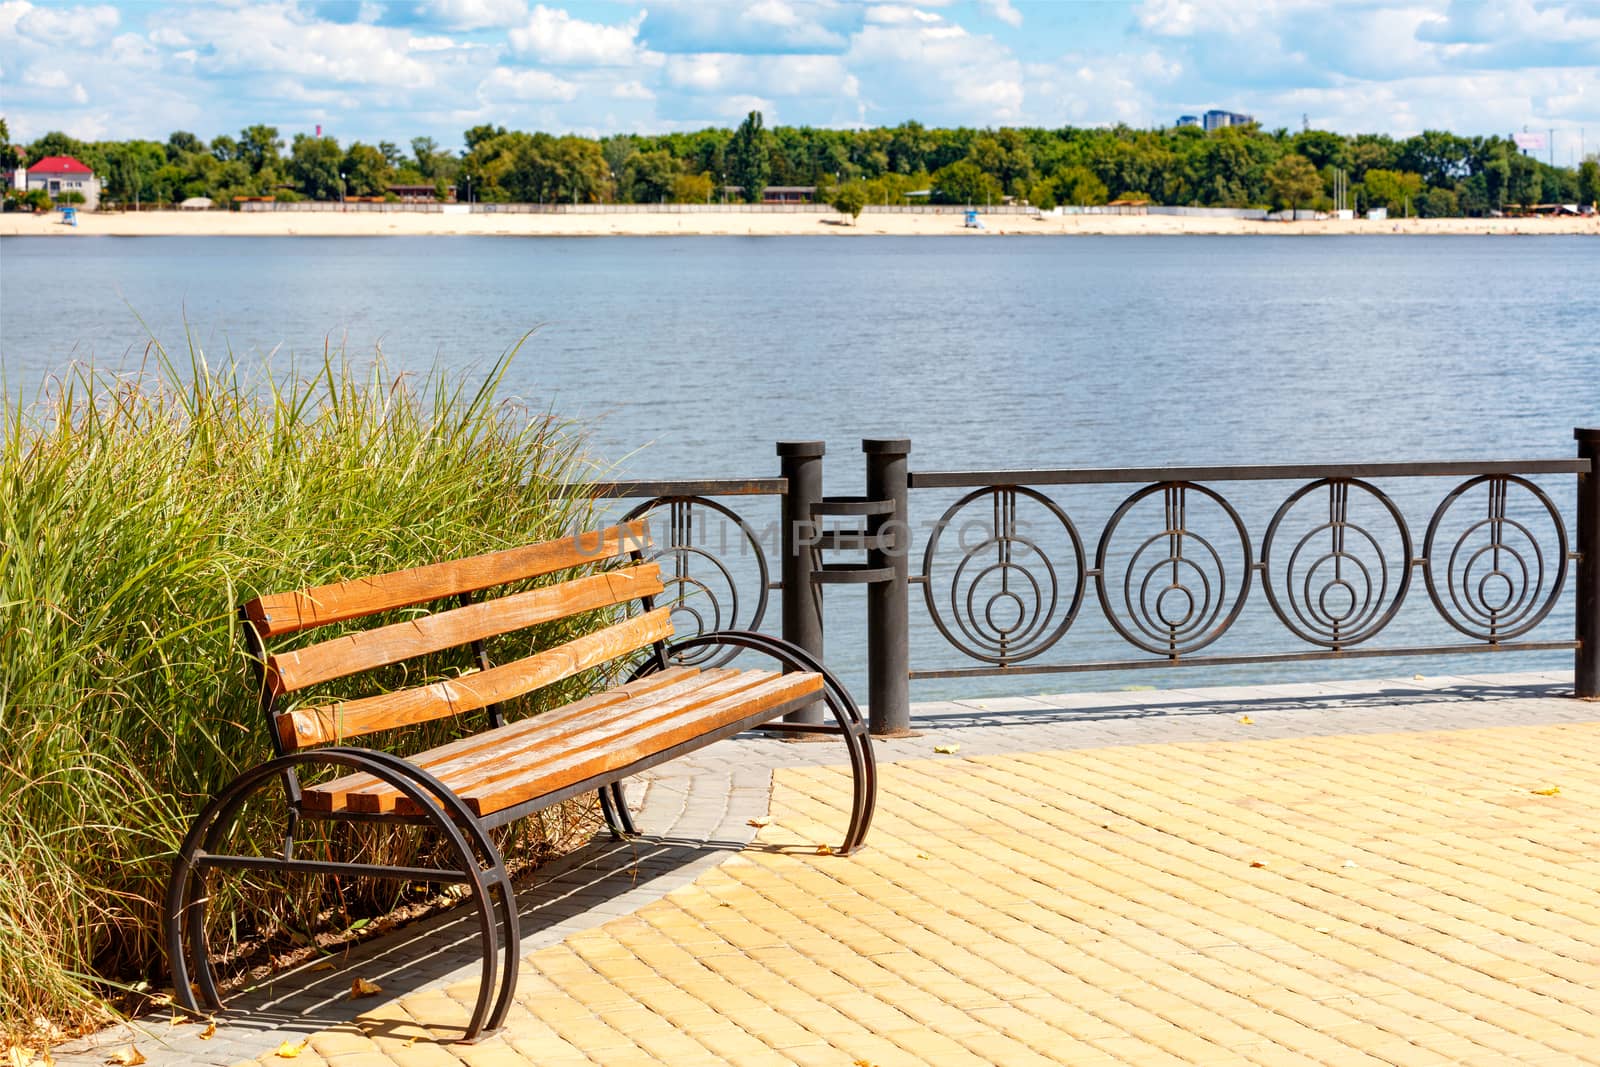 A wooden bench on the Dnipro embankment against the background of a wide river and a blurred sandy beach. by Sergii